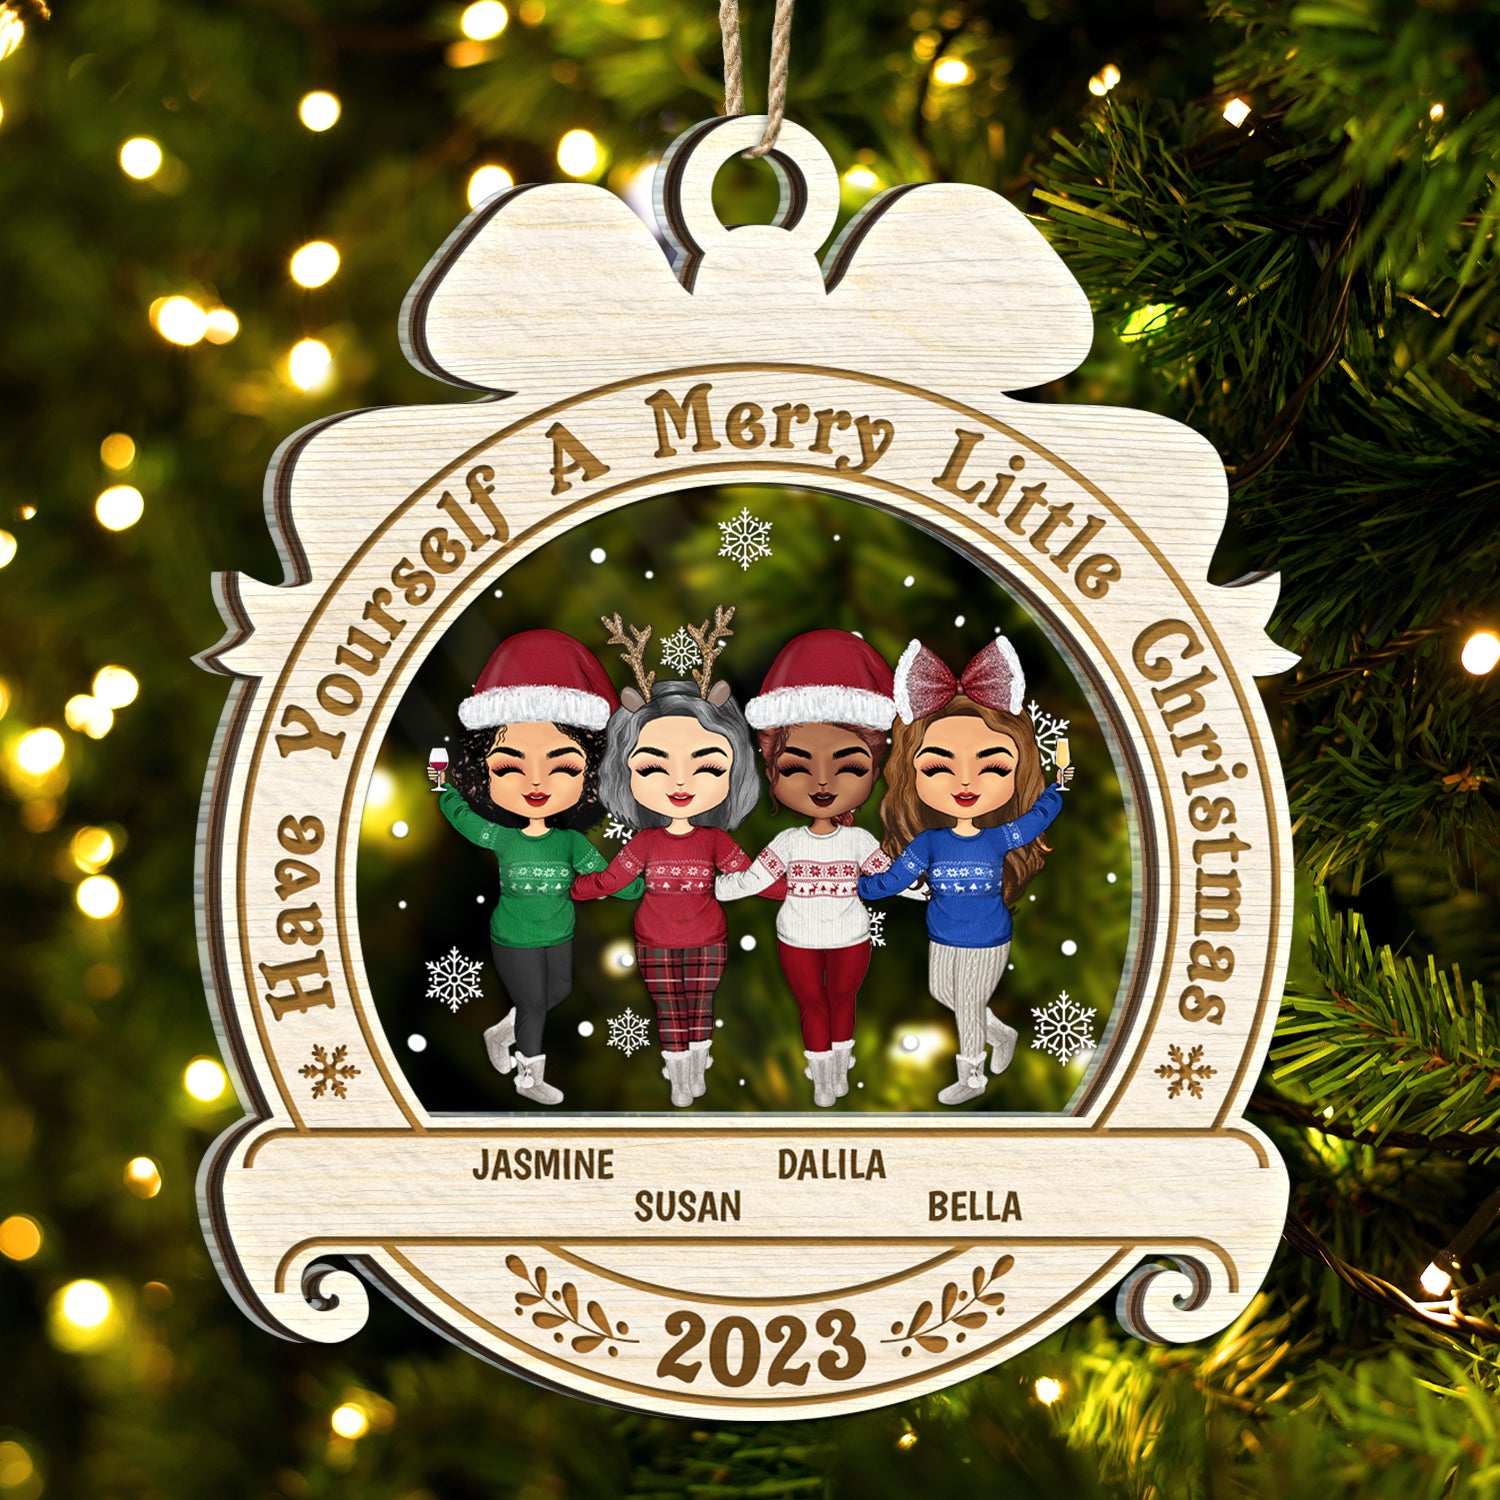 Have Yourself A Merry Little Christmas - Christmas Gift For BFF And Colleagues - Personalized 2-Layered Mix Ornament